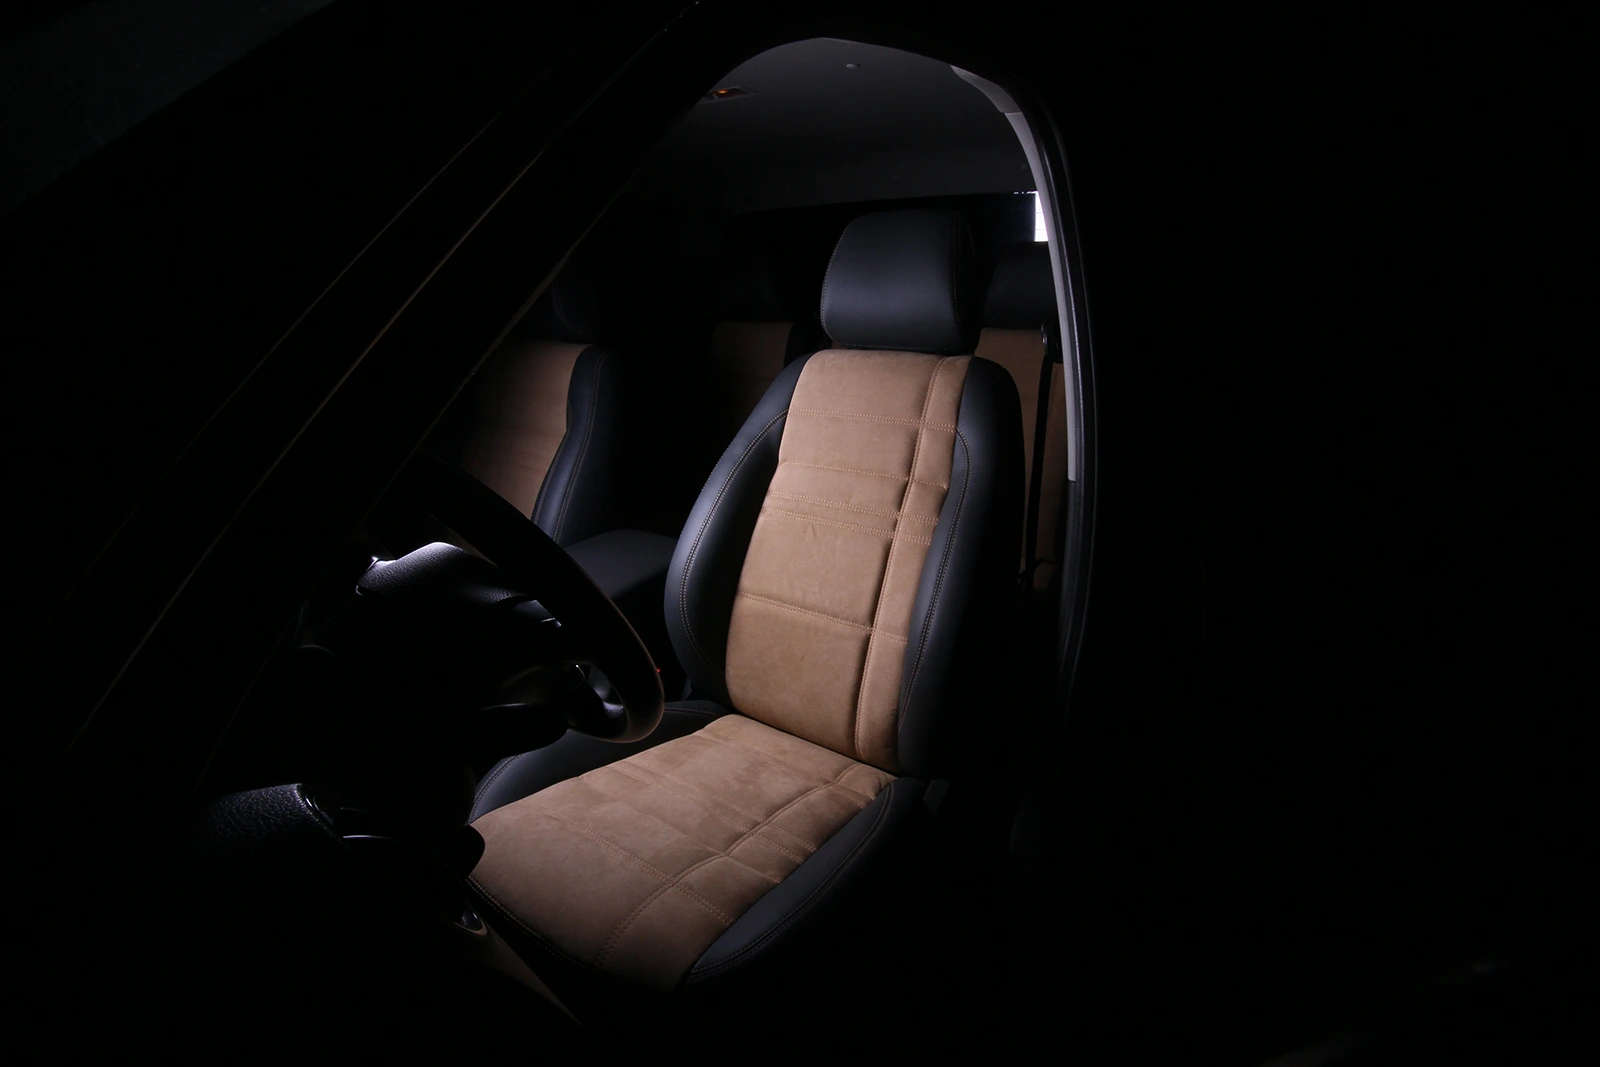 leather seats